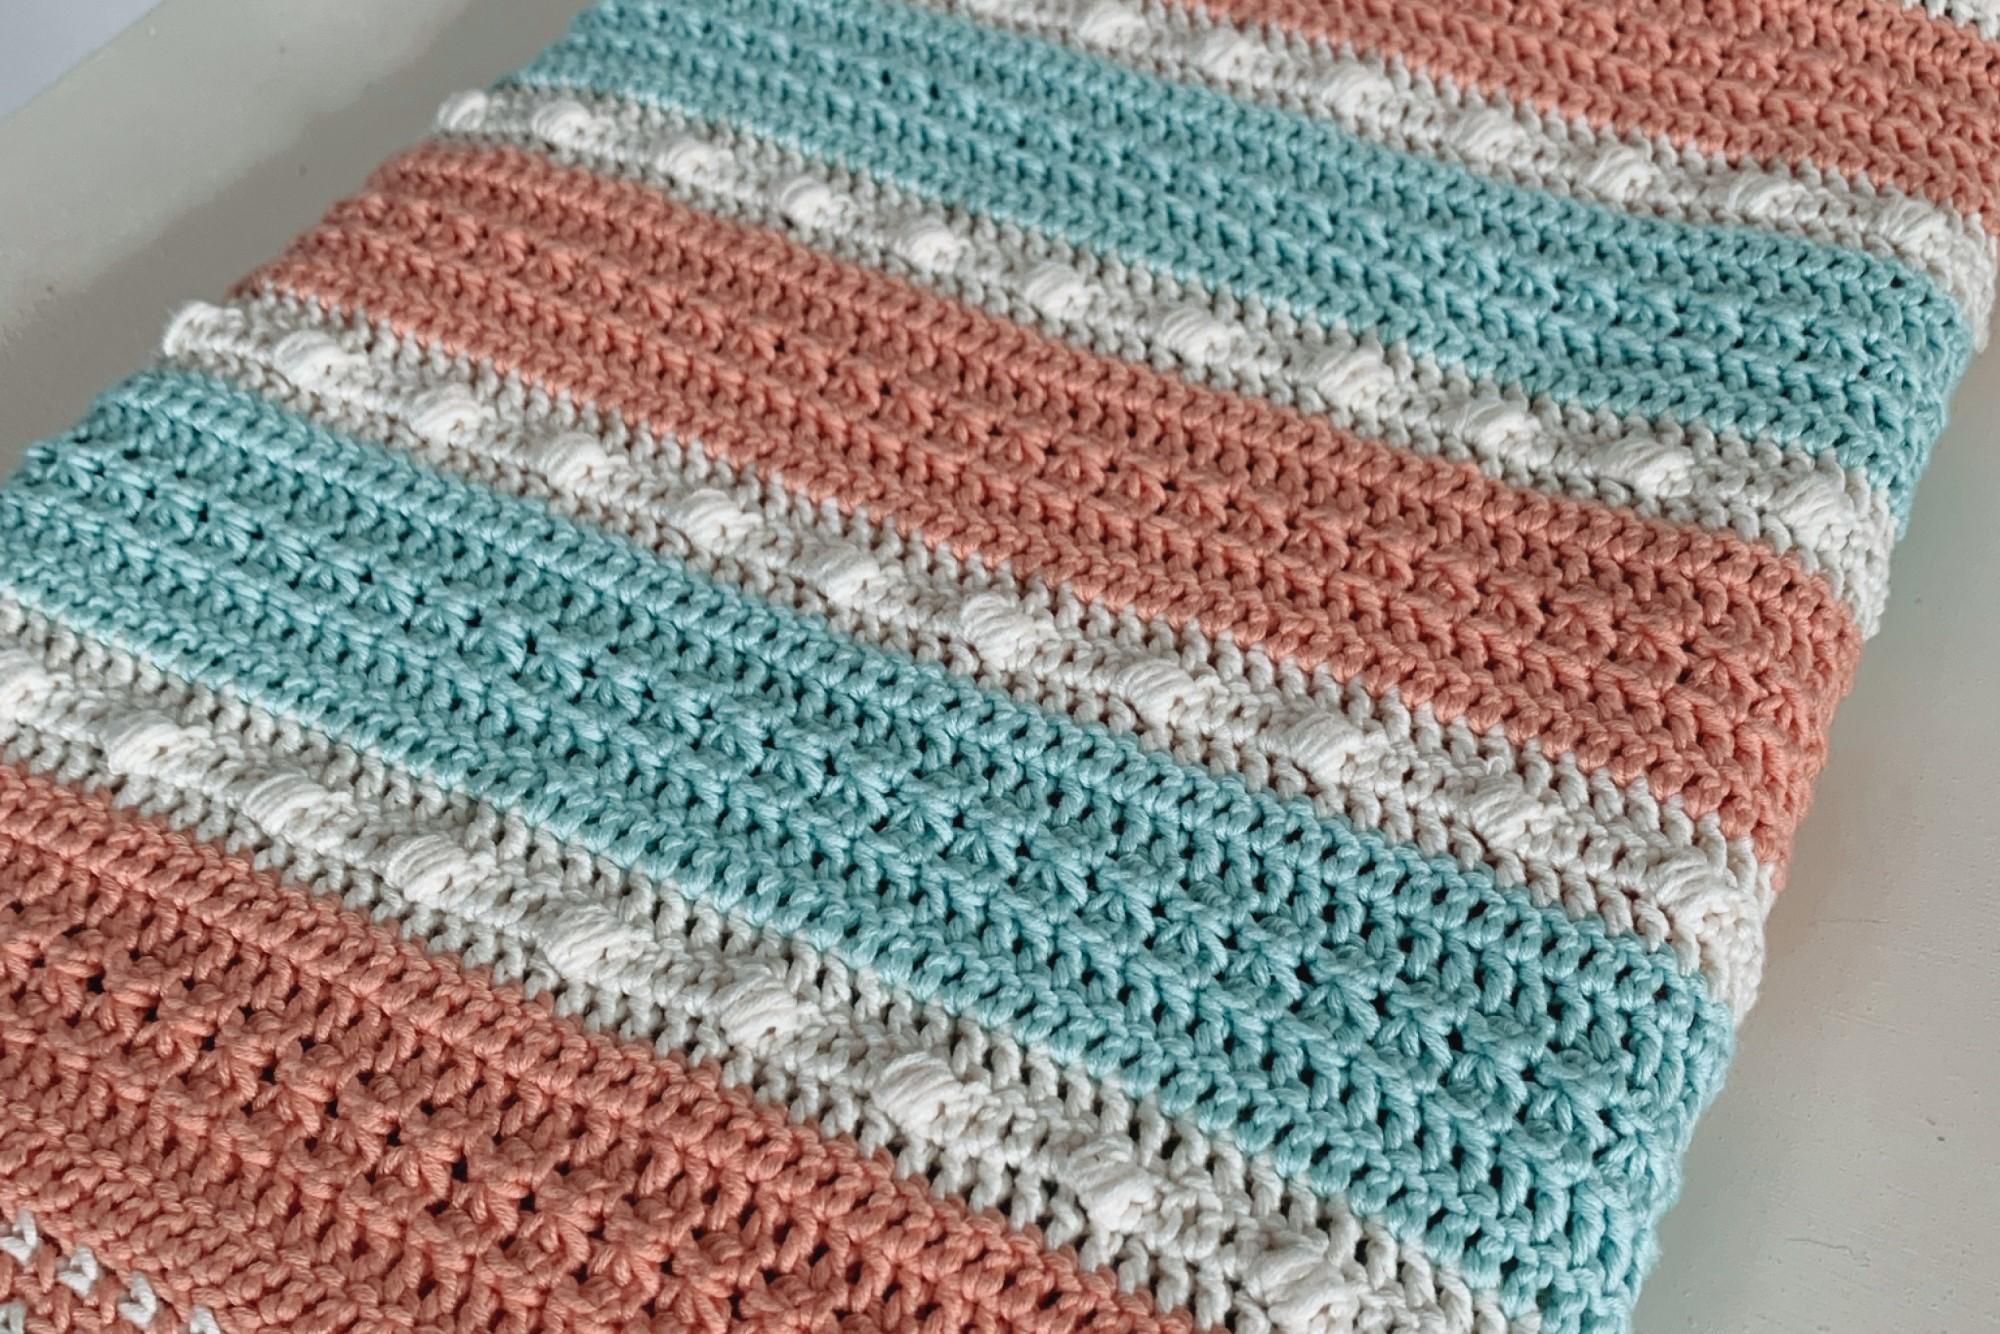 The Starry Dreams Baby Blanket